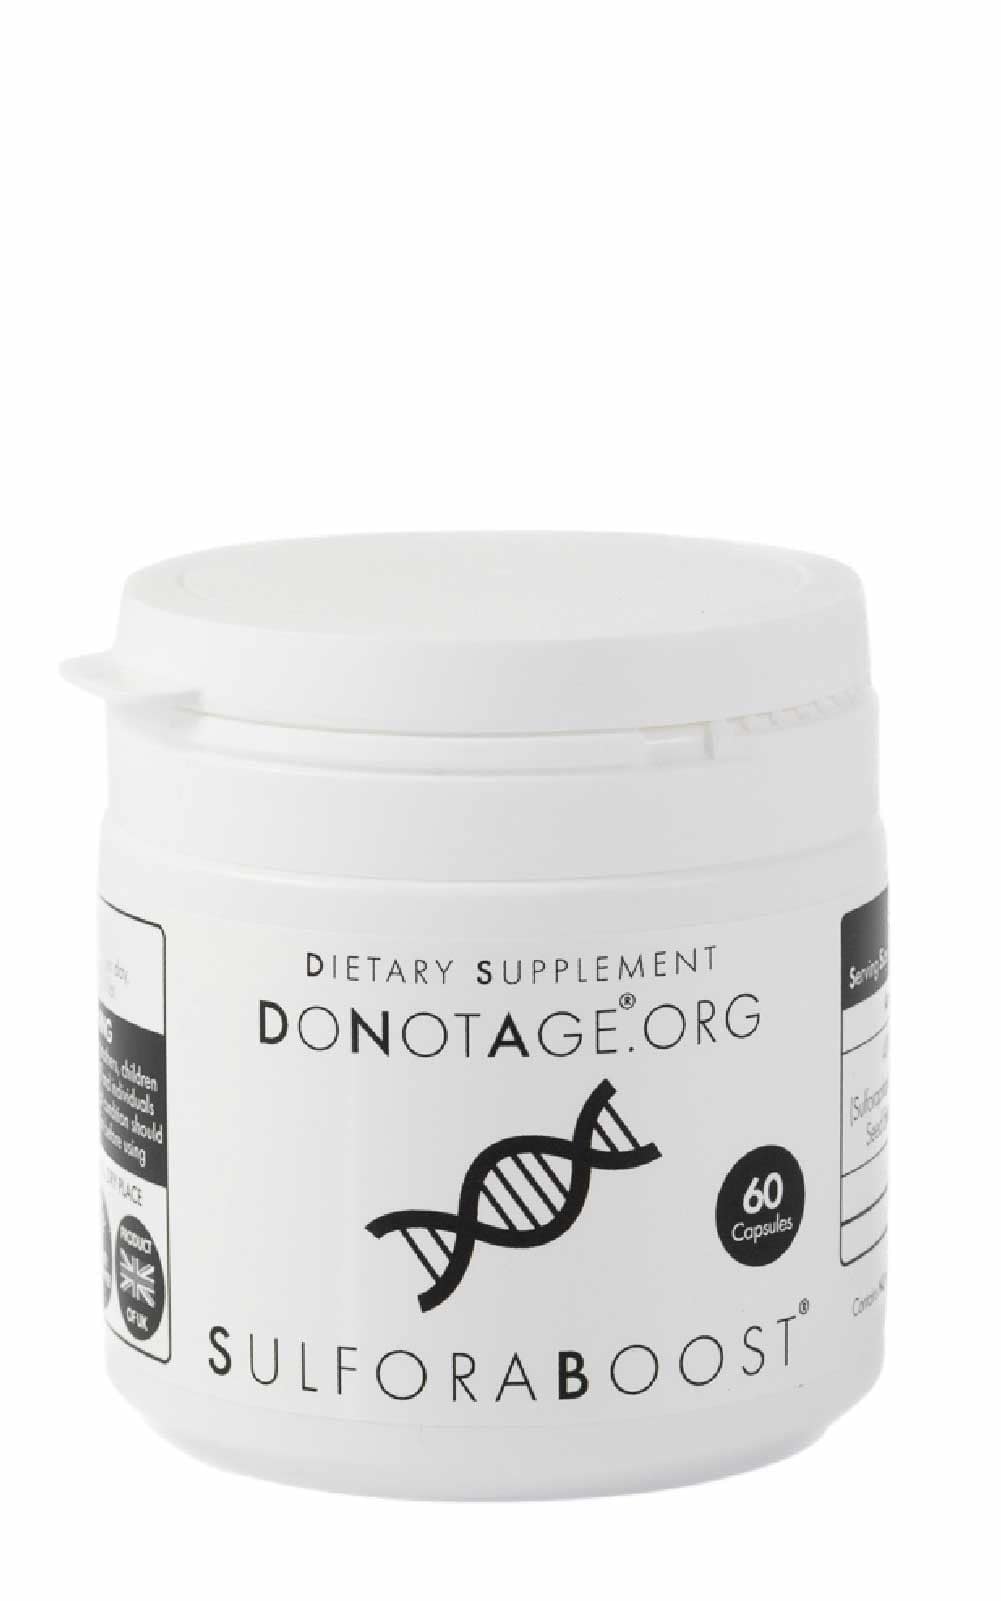 Buy Do Not Age SulforaBoost 60 Capsules at LiveHelfi